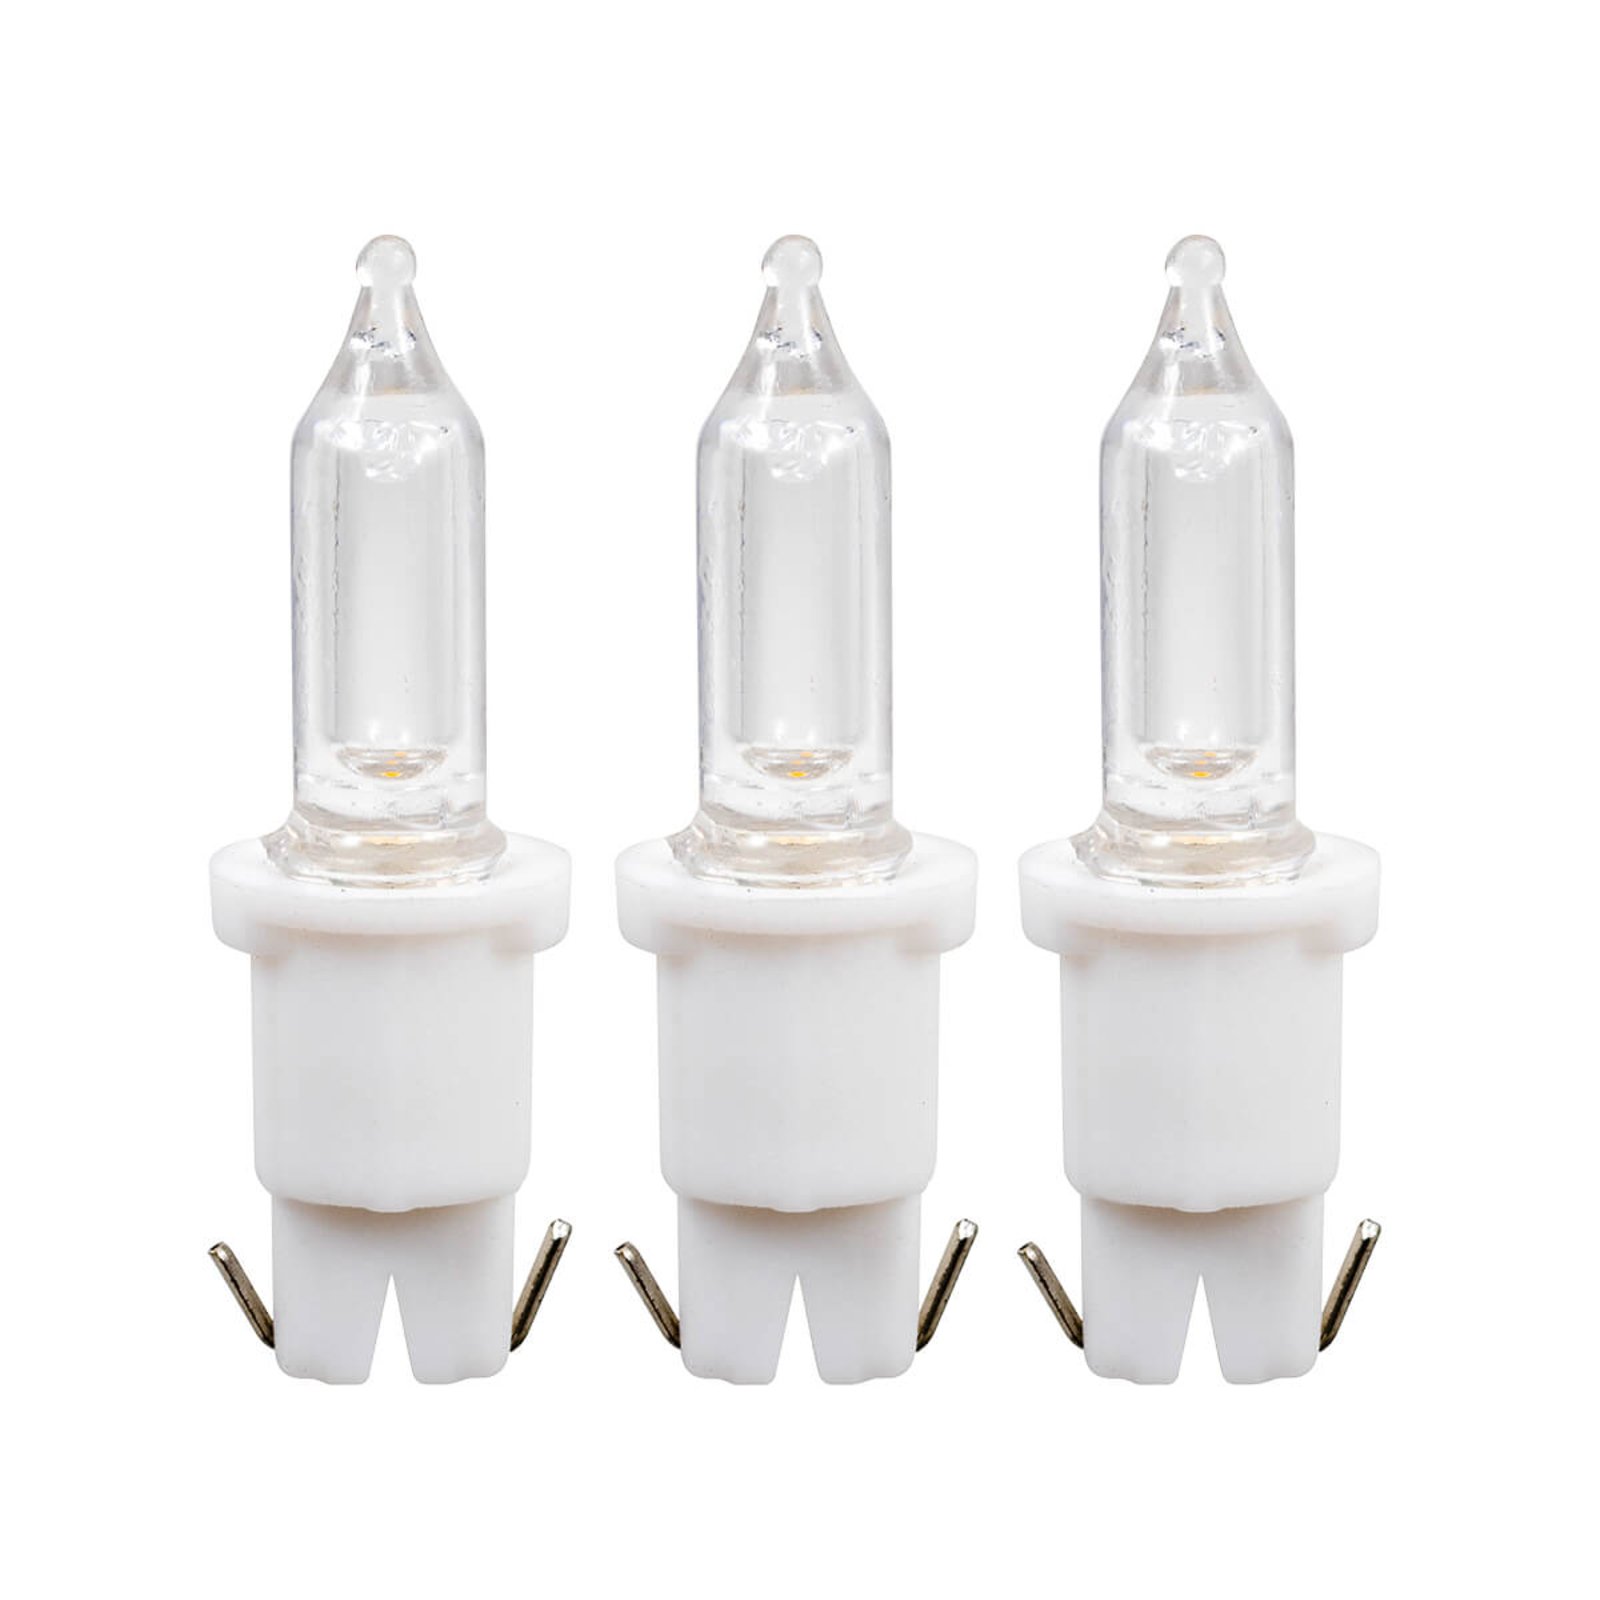 Push-in 0.06 W 3 V spare bulbs in pack of 3